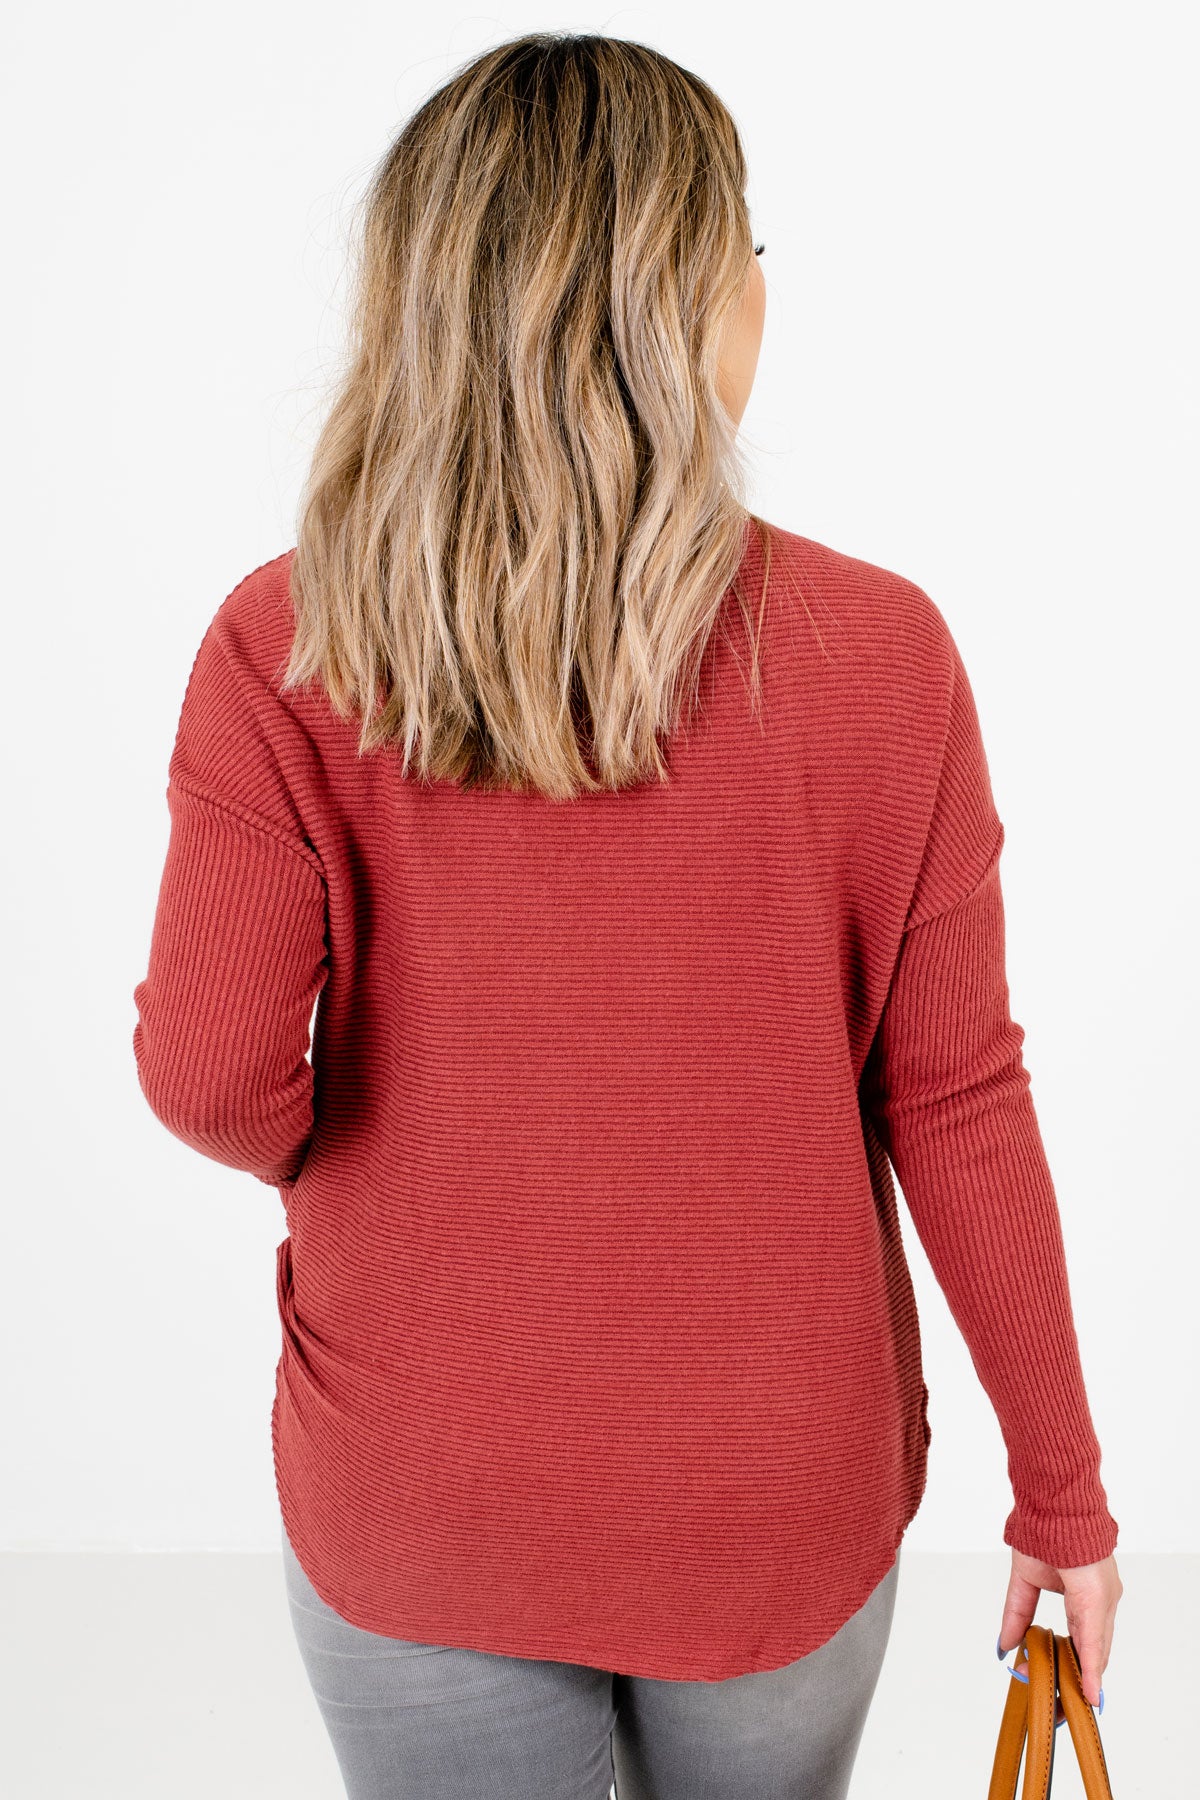 Women’s Brick Red Long Sleeve Boutique Sweater